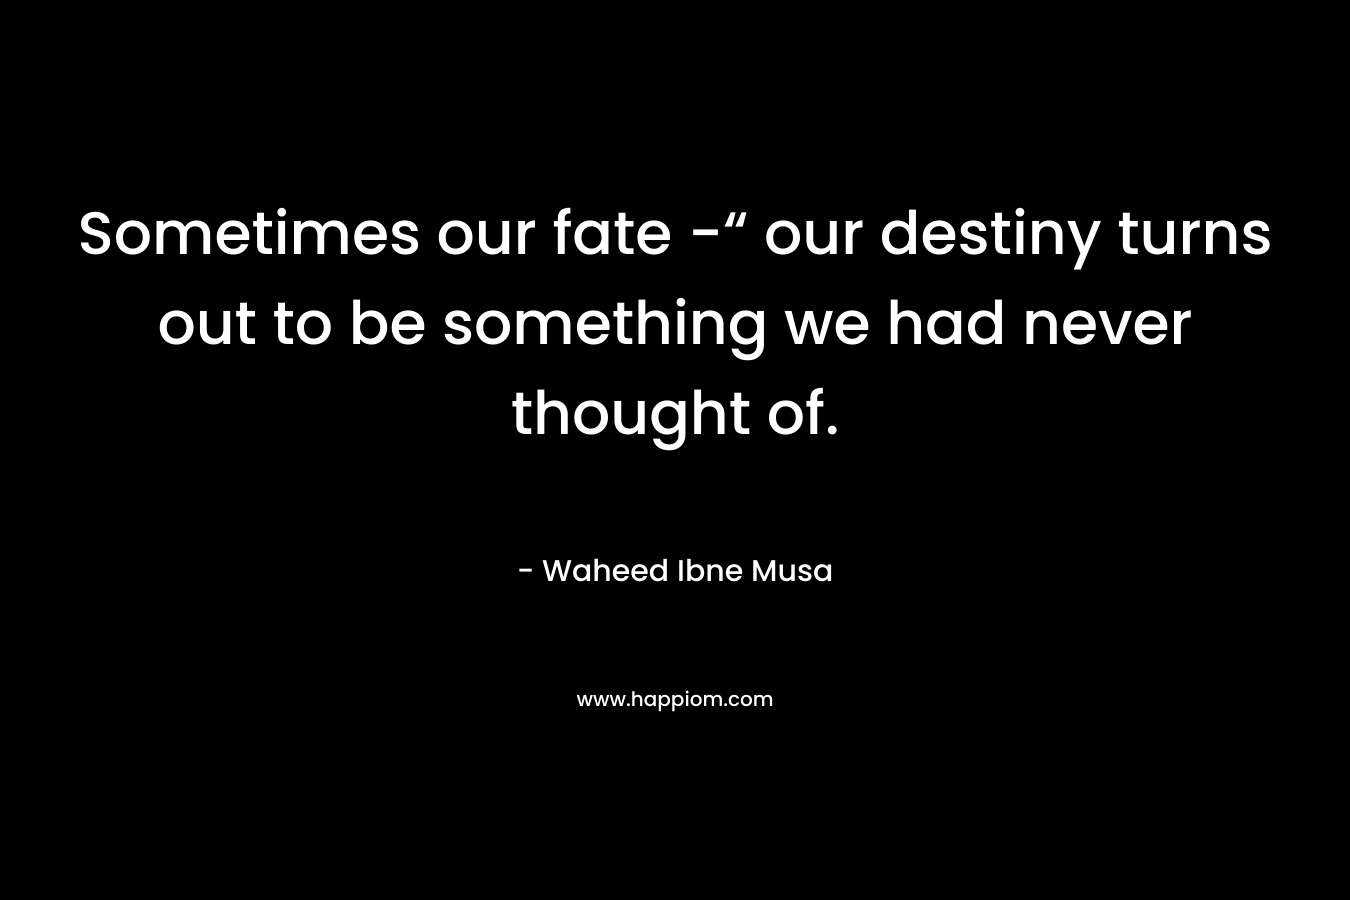 Sometimes our fate -“ our destiny turns out to be something we had never thought of.